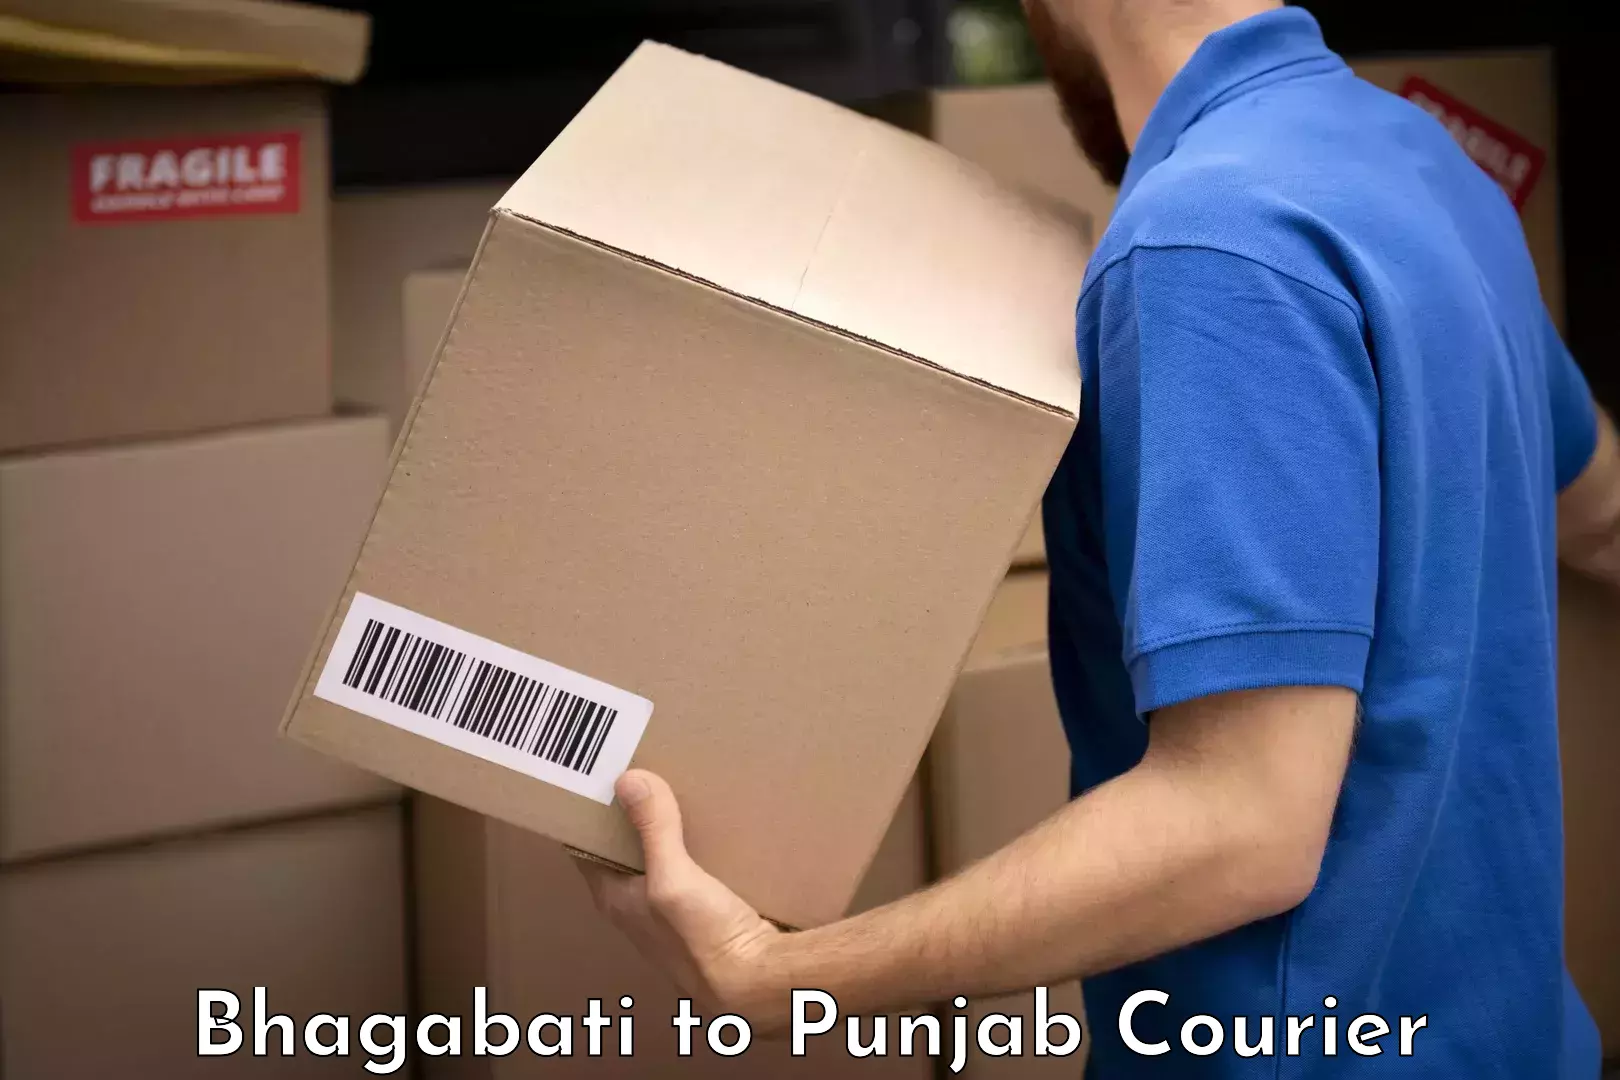 Baggage delivery support Bhagabati to Central University of Punjab Bathinda